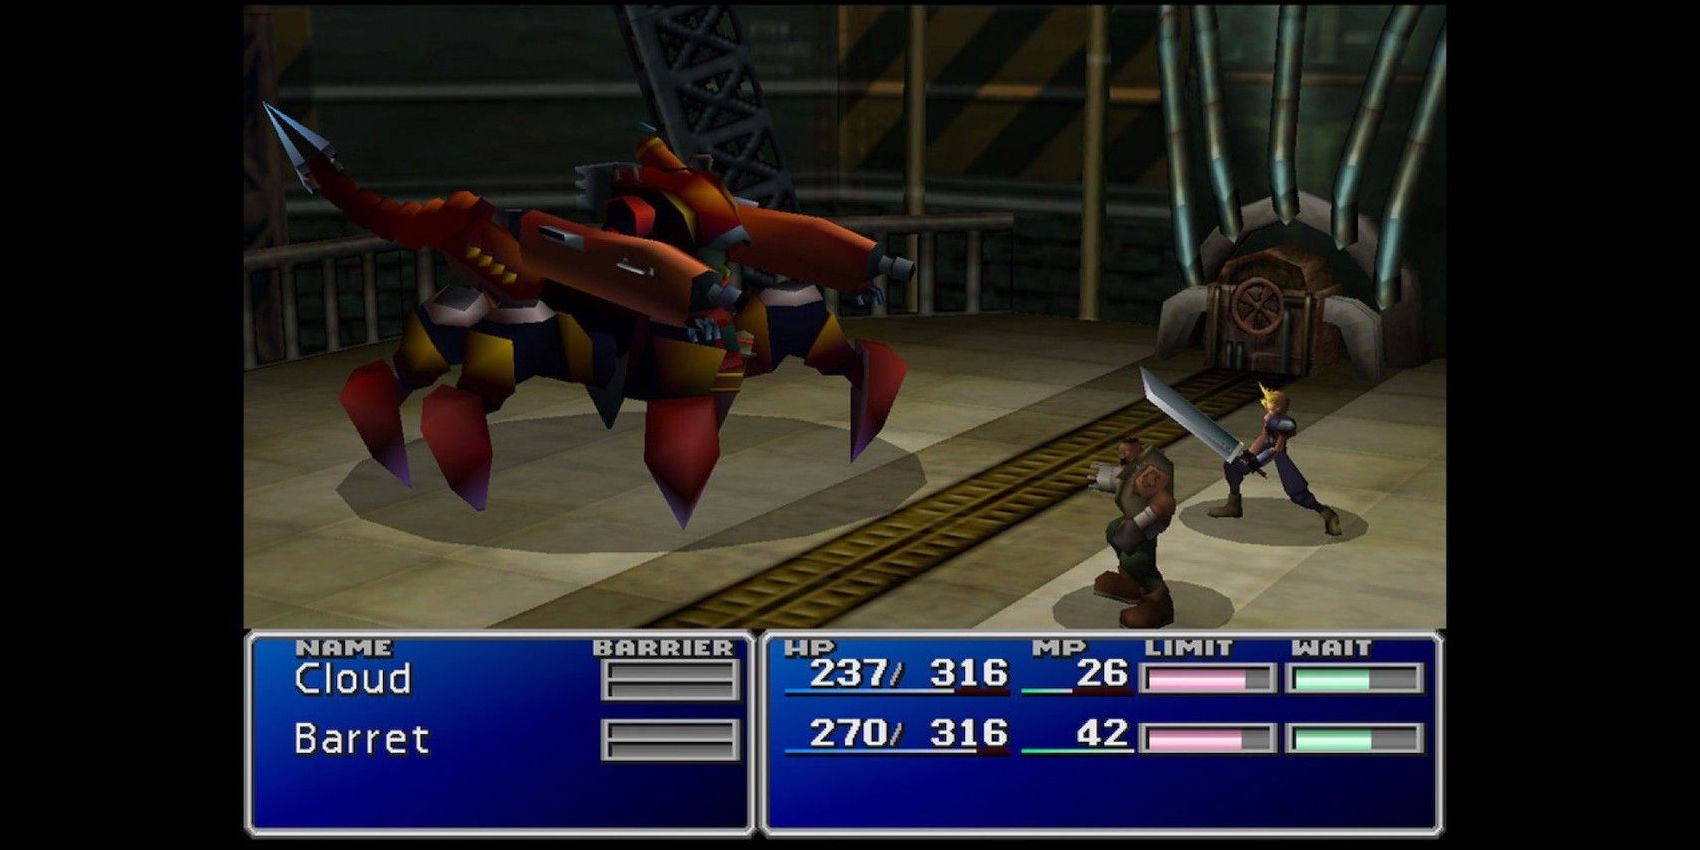 Cloud and Barret take on the Scorpion mech in Final Fantasy VII 